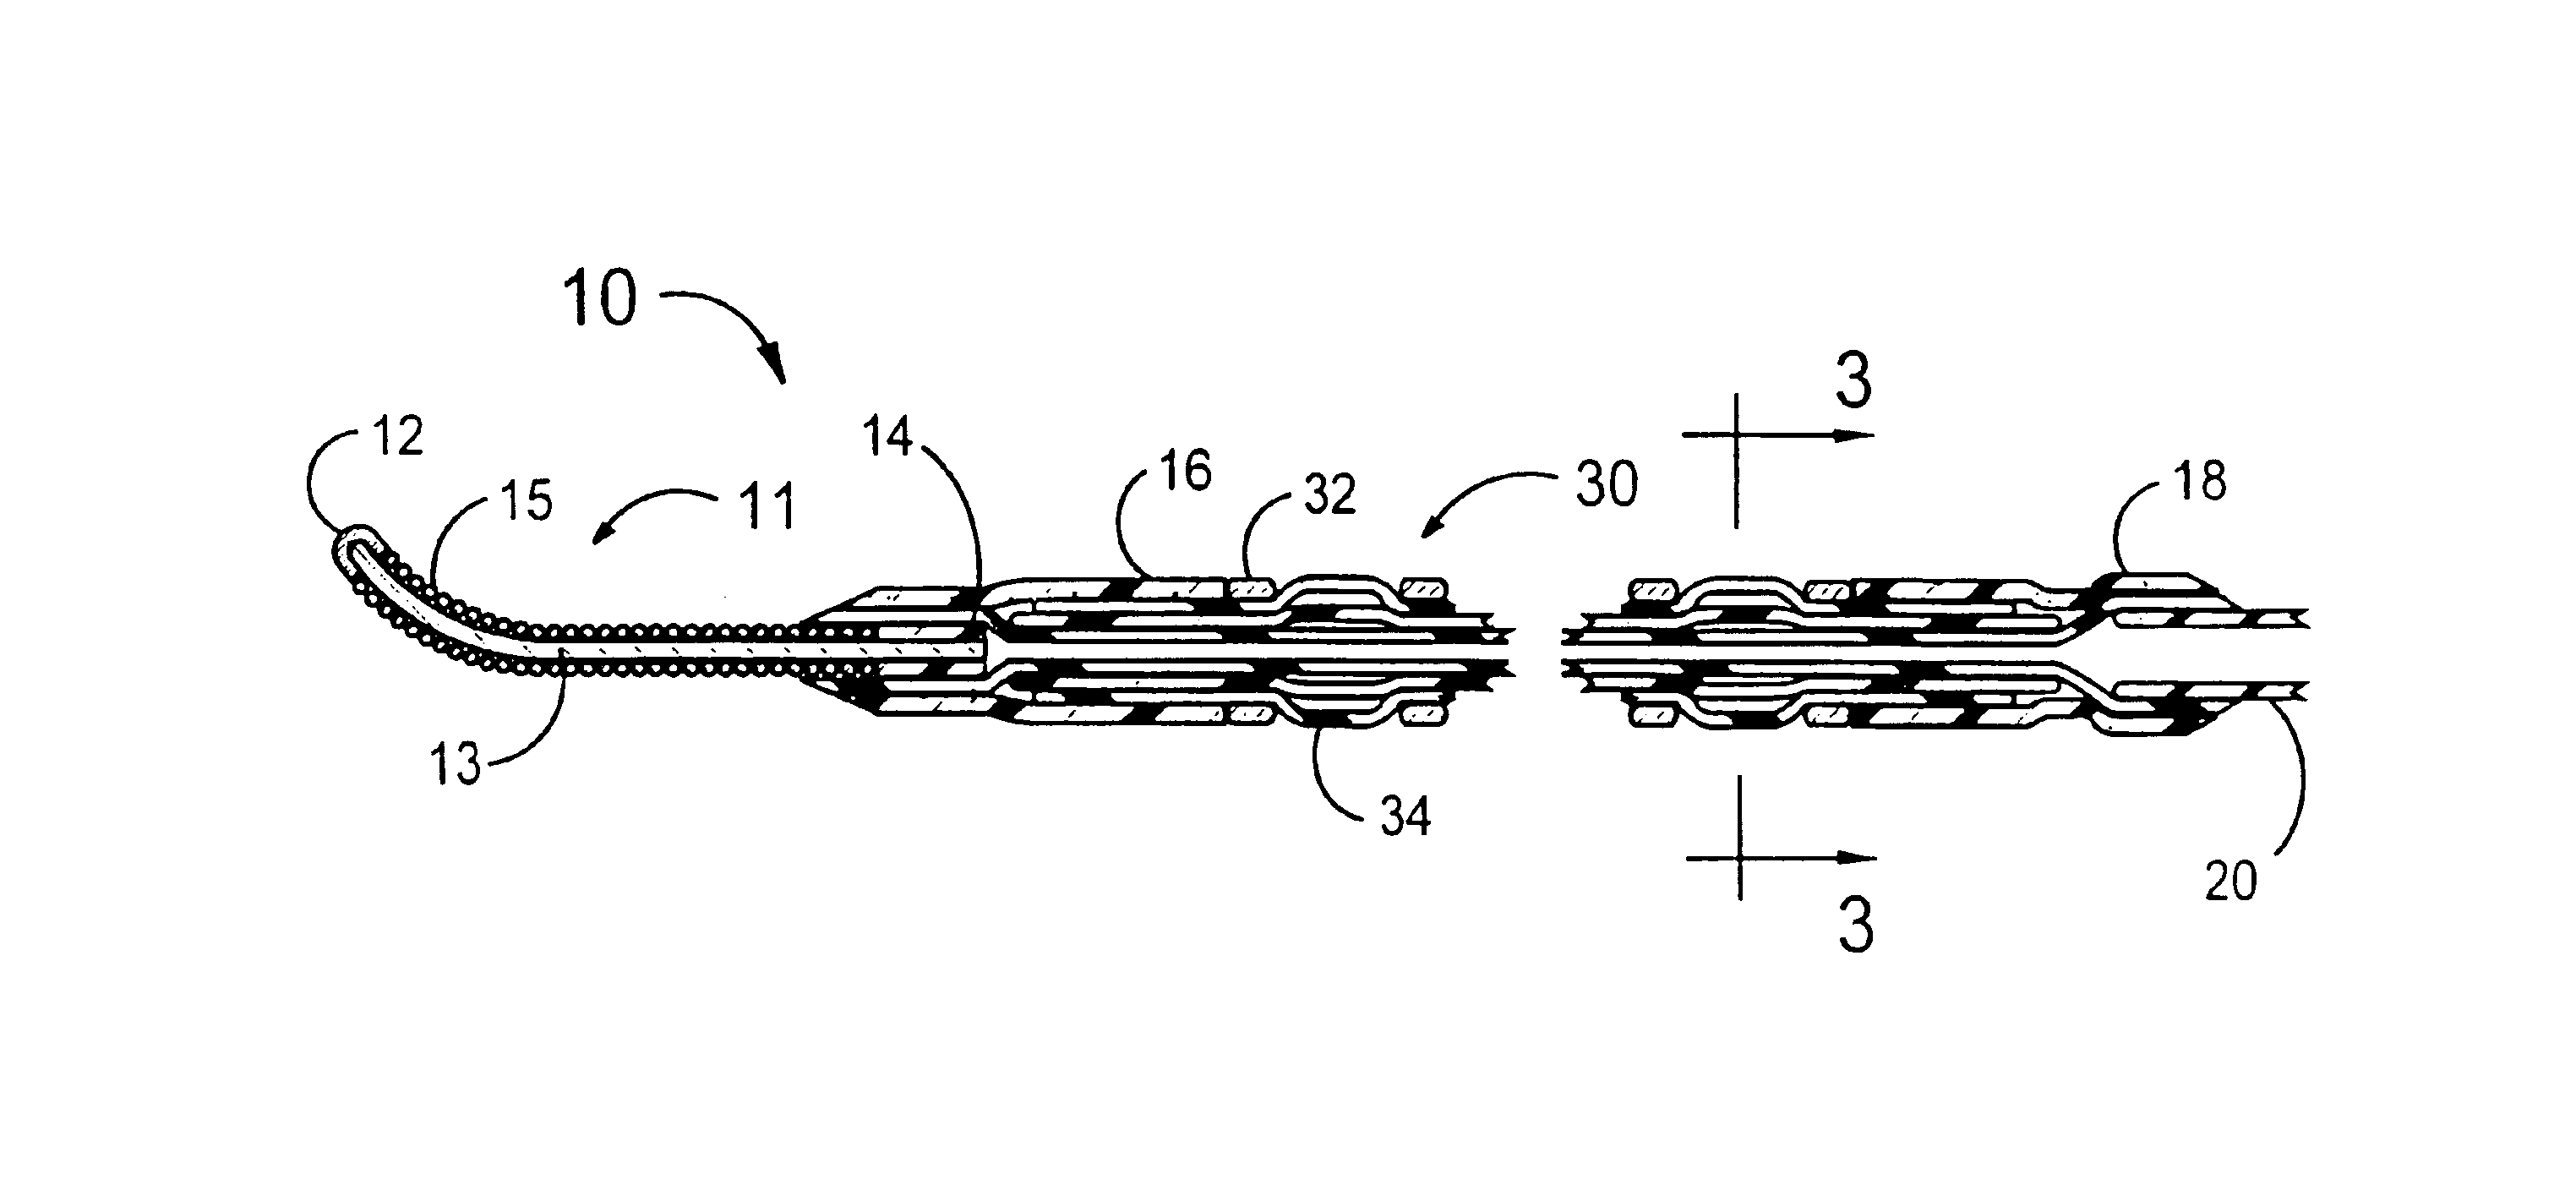 Stent delivery system having a fixed guidewire